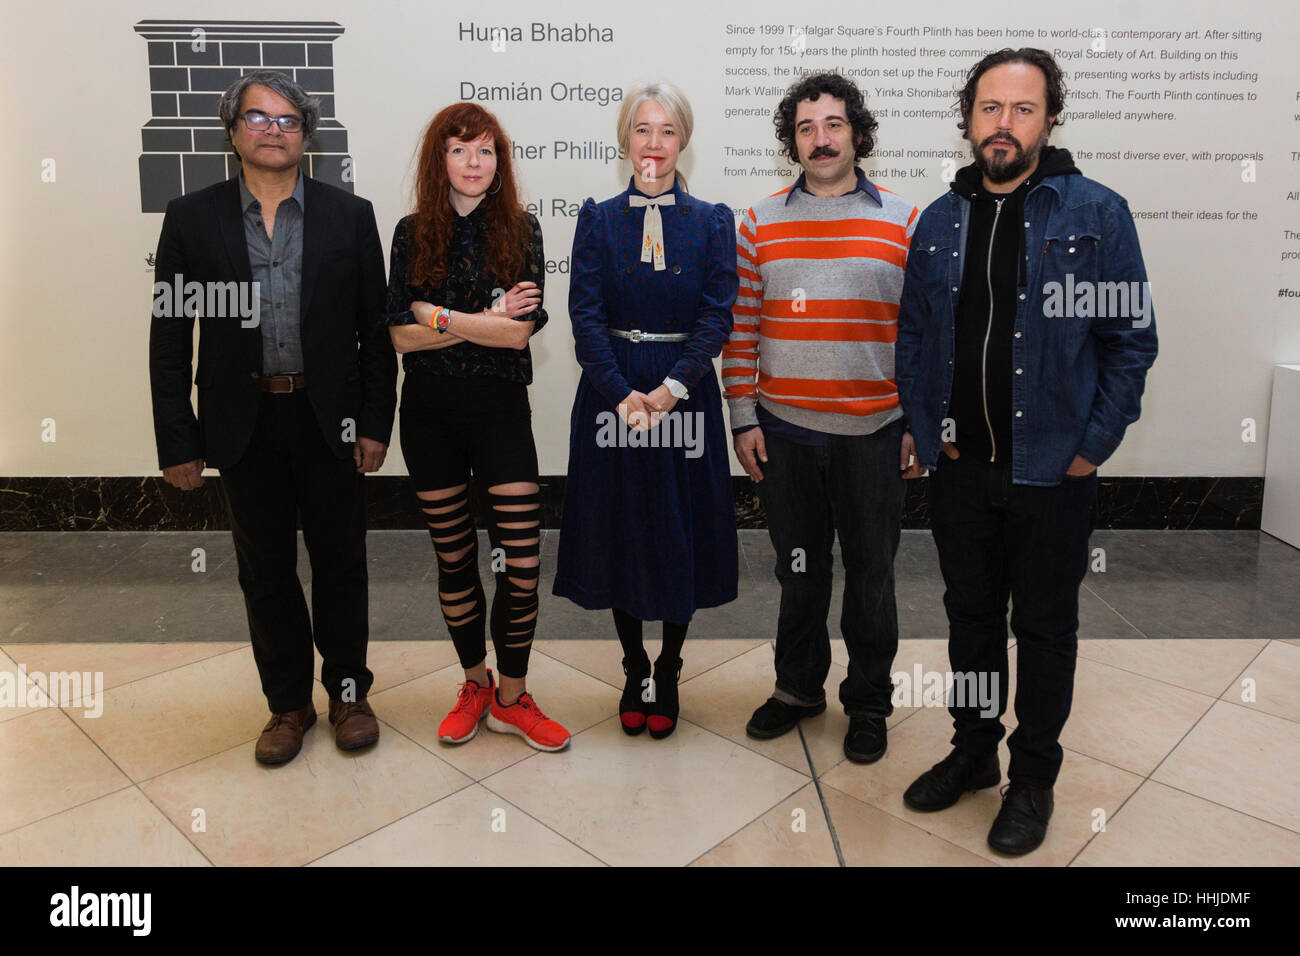 London, UK. 19 January 2017. L-R: Shuddhabrata Sengupta, Heather Phillipson, Justine Simons, Michael Rakowitz, Damian Ortega. Artists Damian Ortega, Heather Phillipson, Michael Rakowitz and Shuddhabrata Senguppta from Raqs Media Collective join Justine Simons, Deputy Mayor for Culture and Creative Industries, and Ekow Eshun, Chair of the Fourth Plinth Commission Panet, at the press preview for the Shortlist Exhibition. Maquettes of the shortlisted works are on display at the National Gallery until 26 March 2017. The proposals on display are Untitled by Huma Bhabha, High Way/Higher by Damian Or Stock Photo